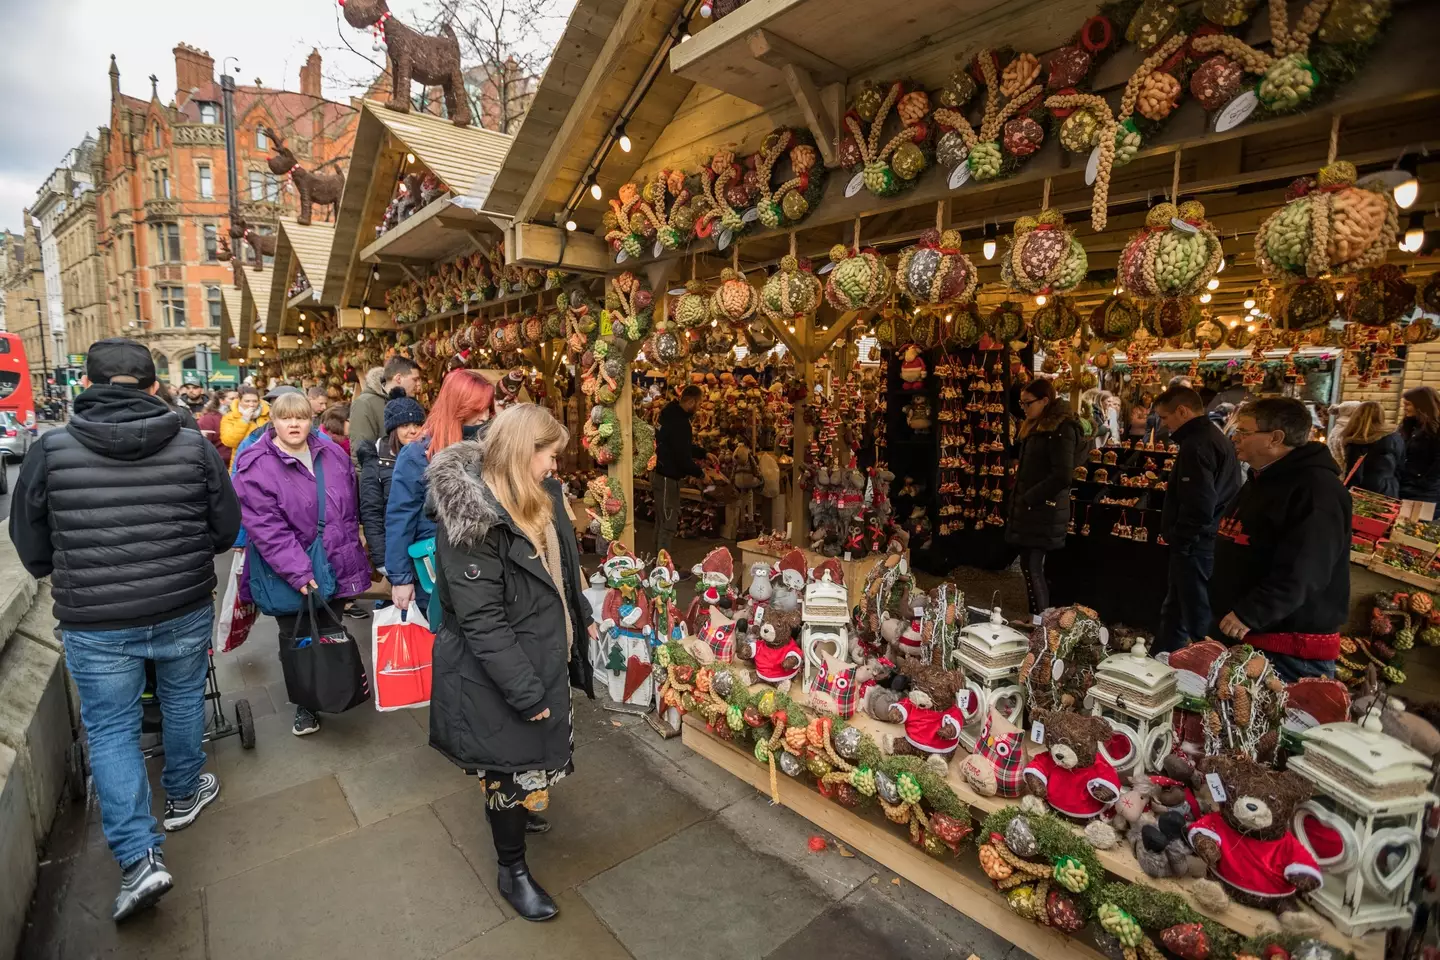 It may look like festive fun, but many at the Christmas markets are struggling to make money.